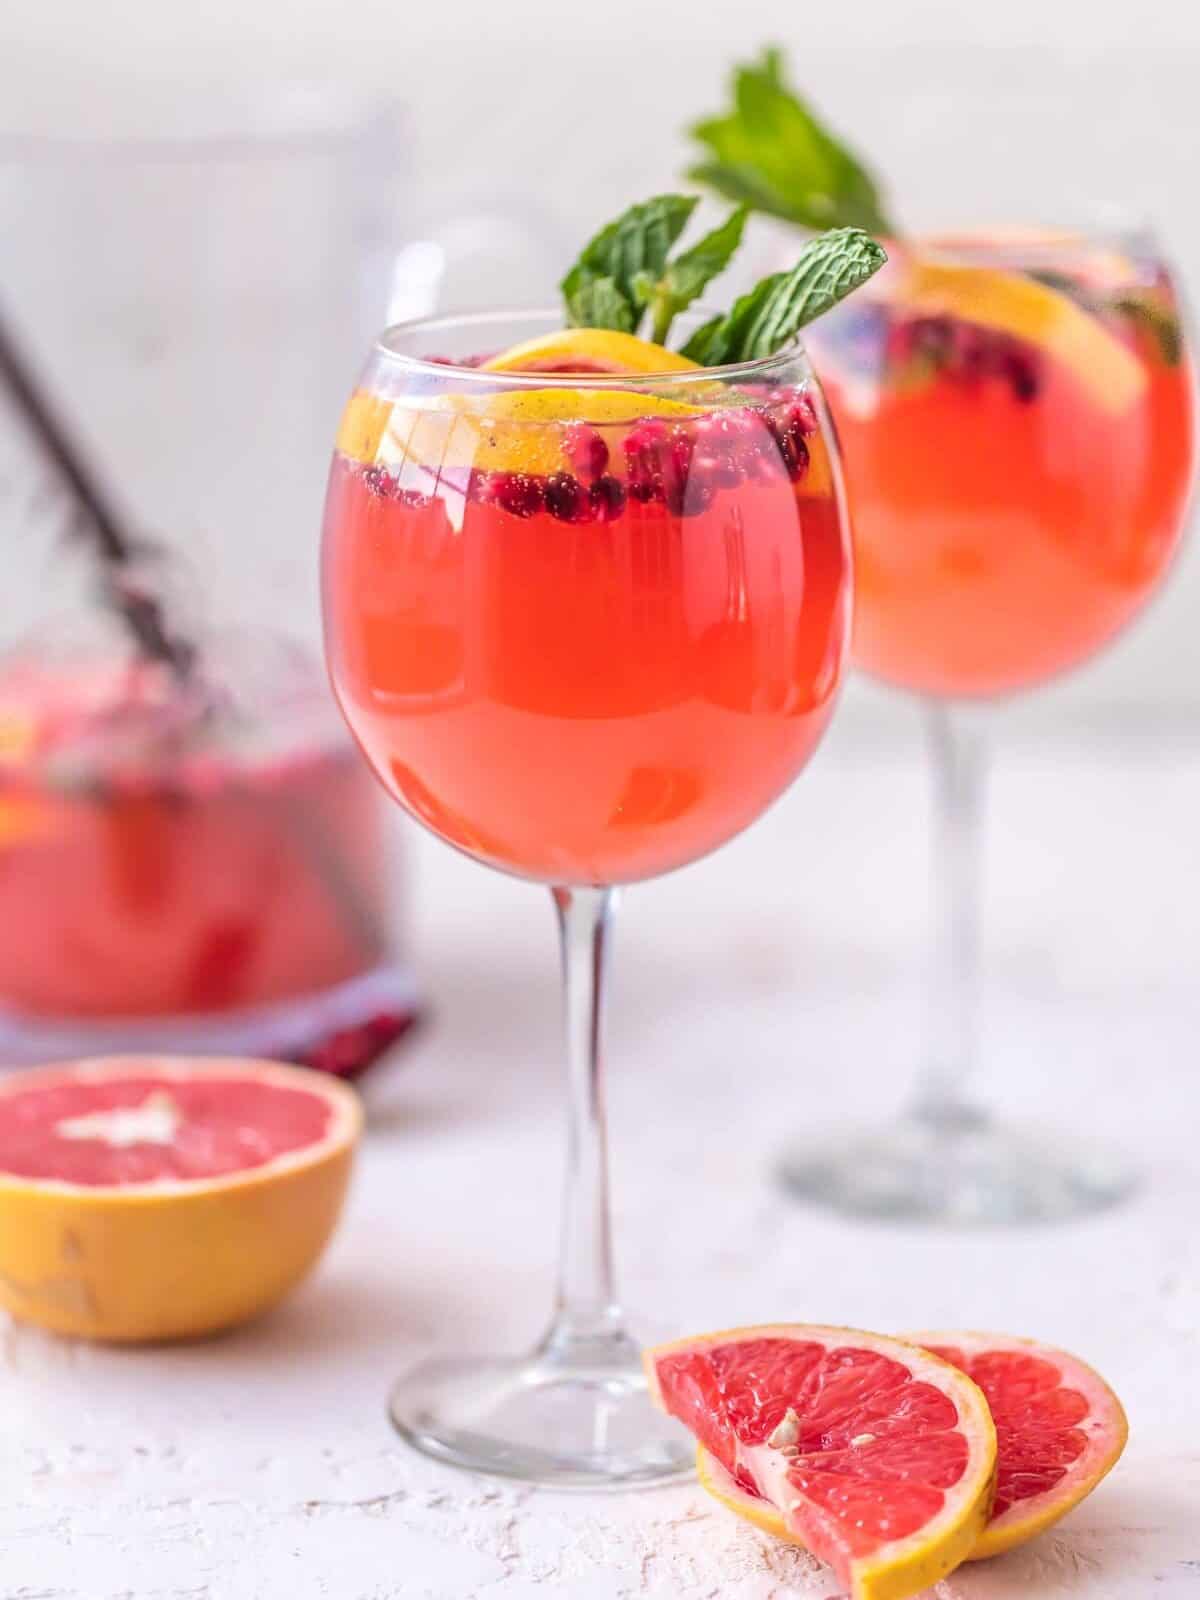 glasses of pink champagne sangria in wine glasses